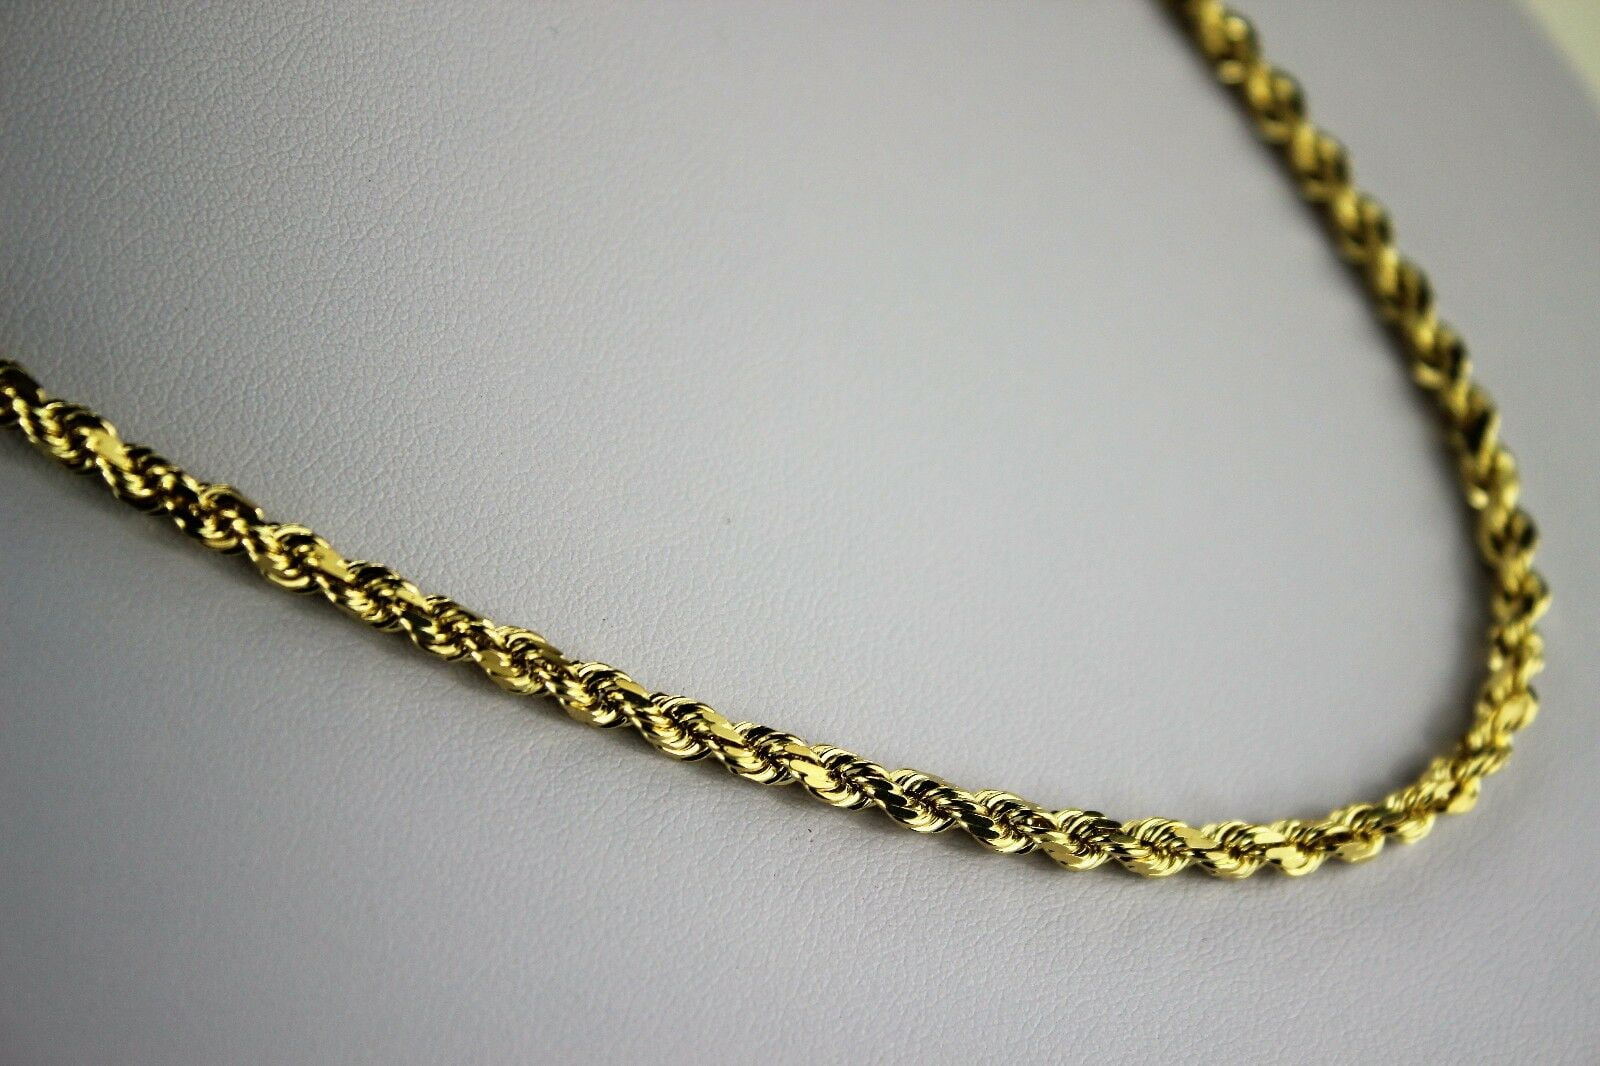 Floreo 10k Yellow or White Gold 1.3mm Thin Singapore Chain Necklace 